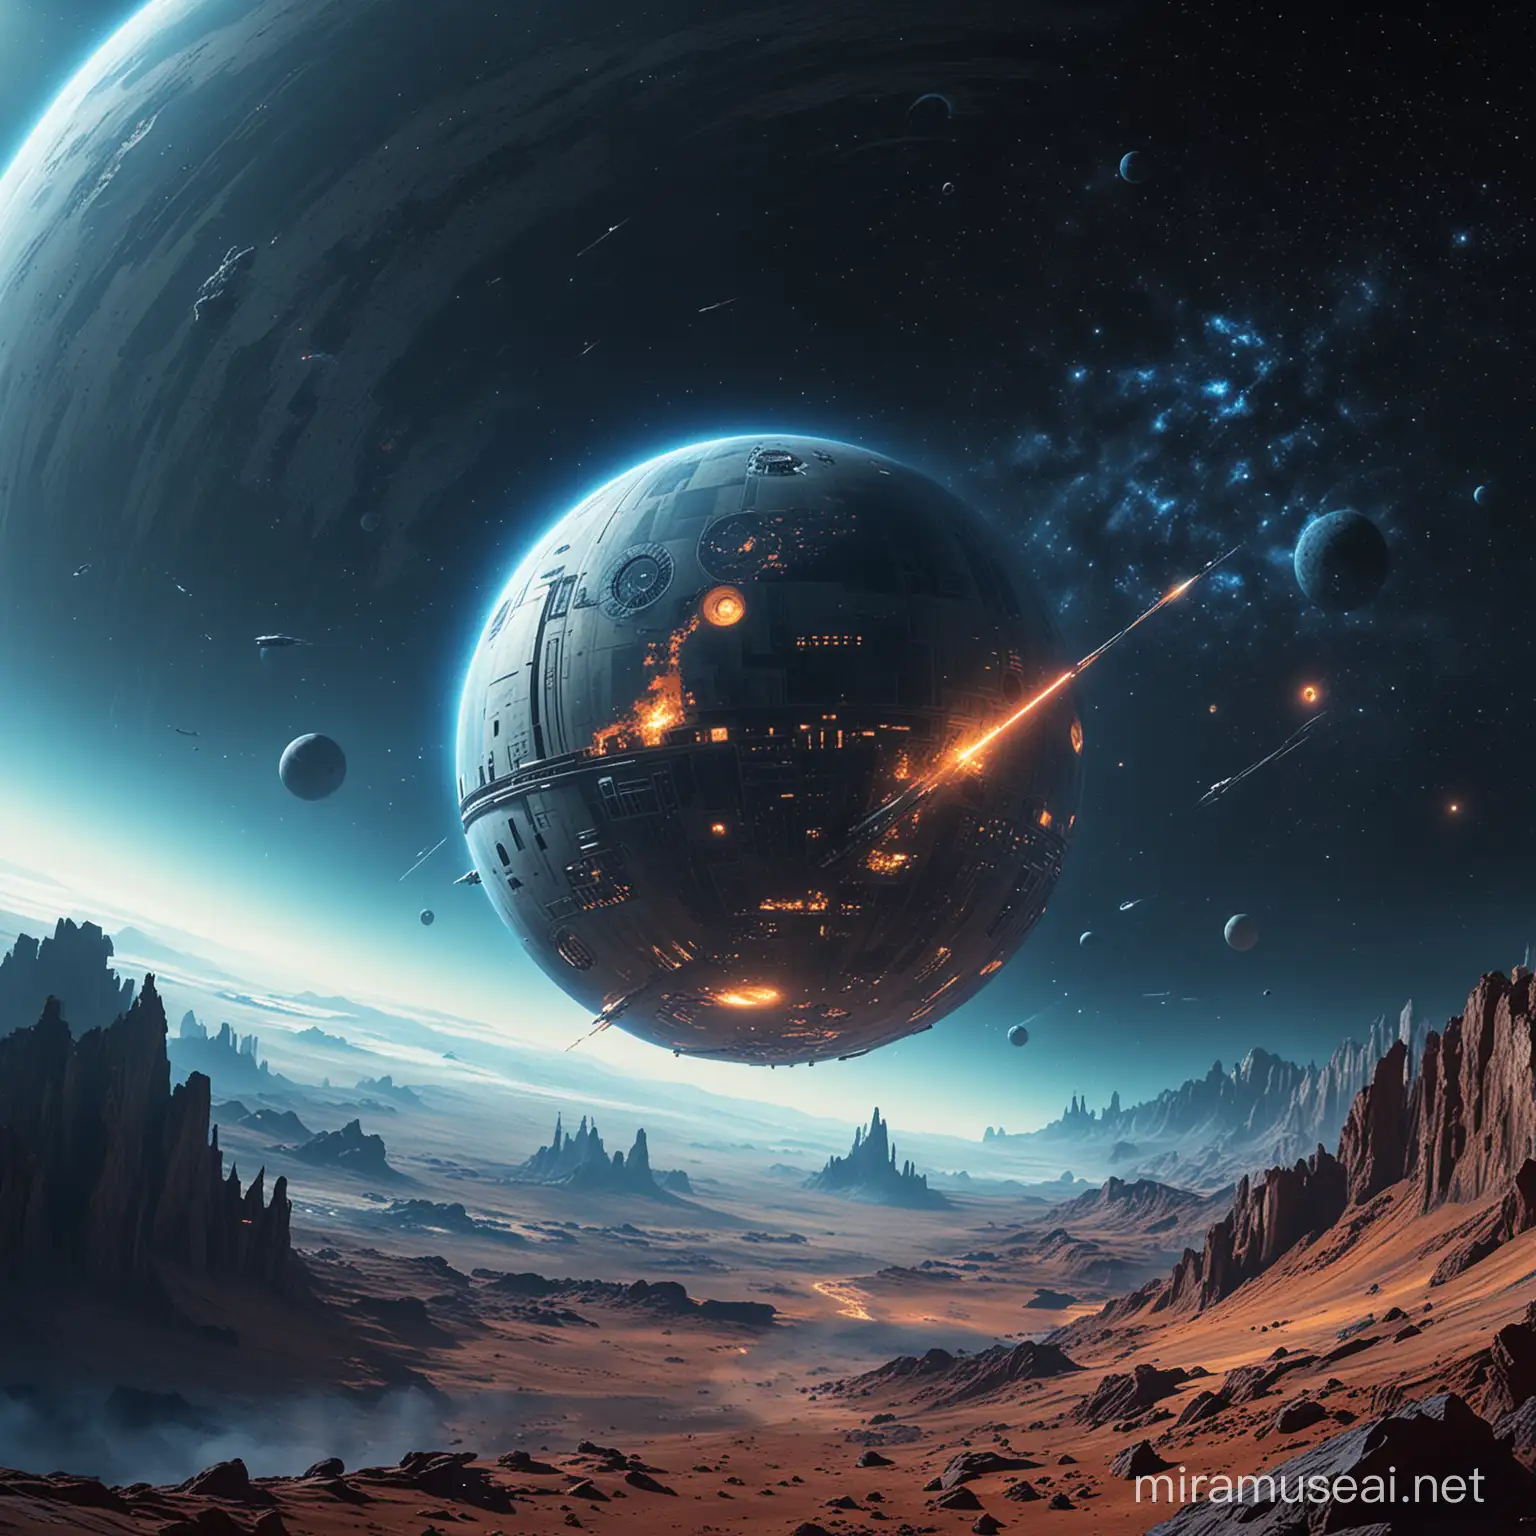 star wars inspired planet in space. modern, high tech. warm and blue tone
